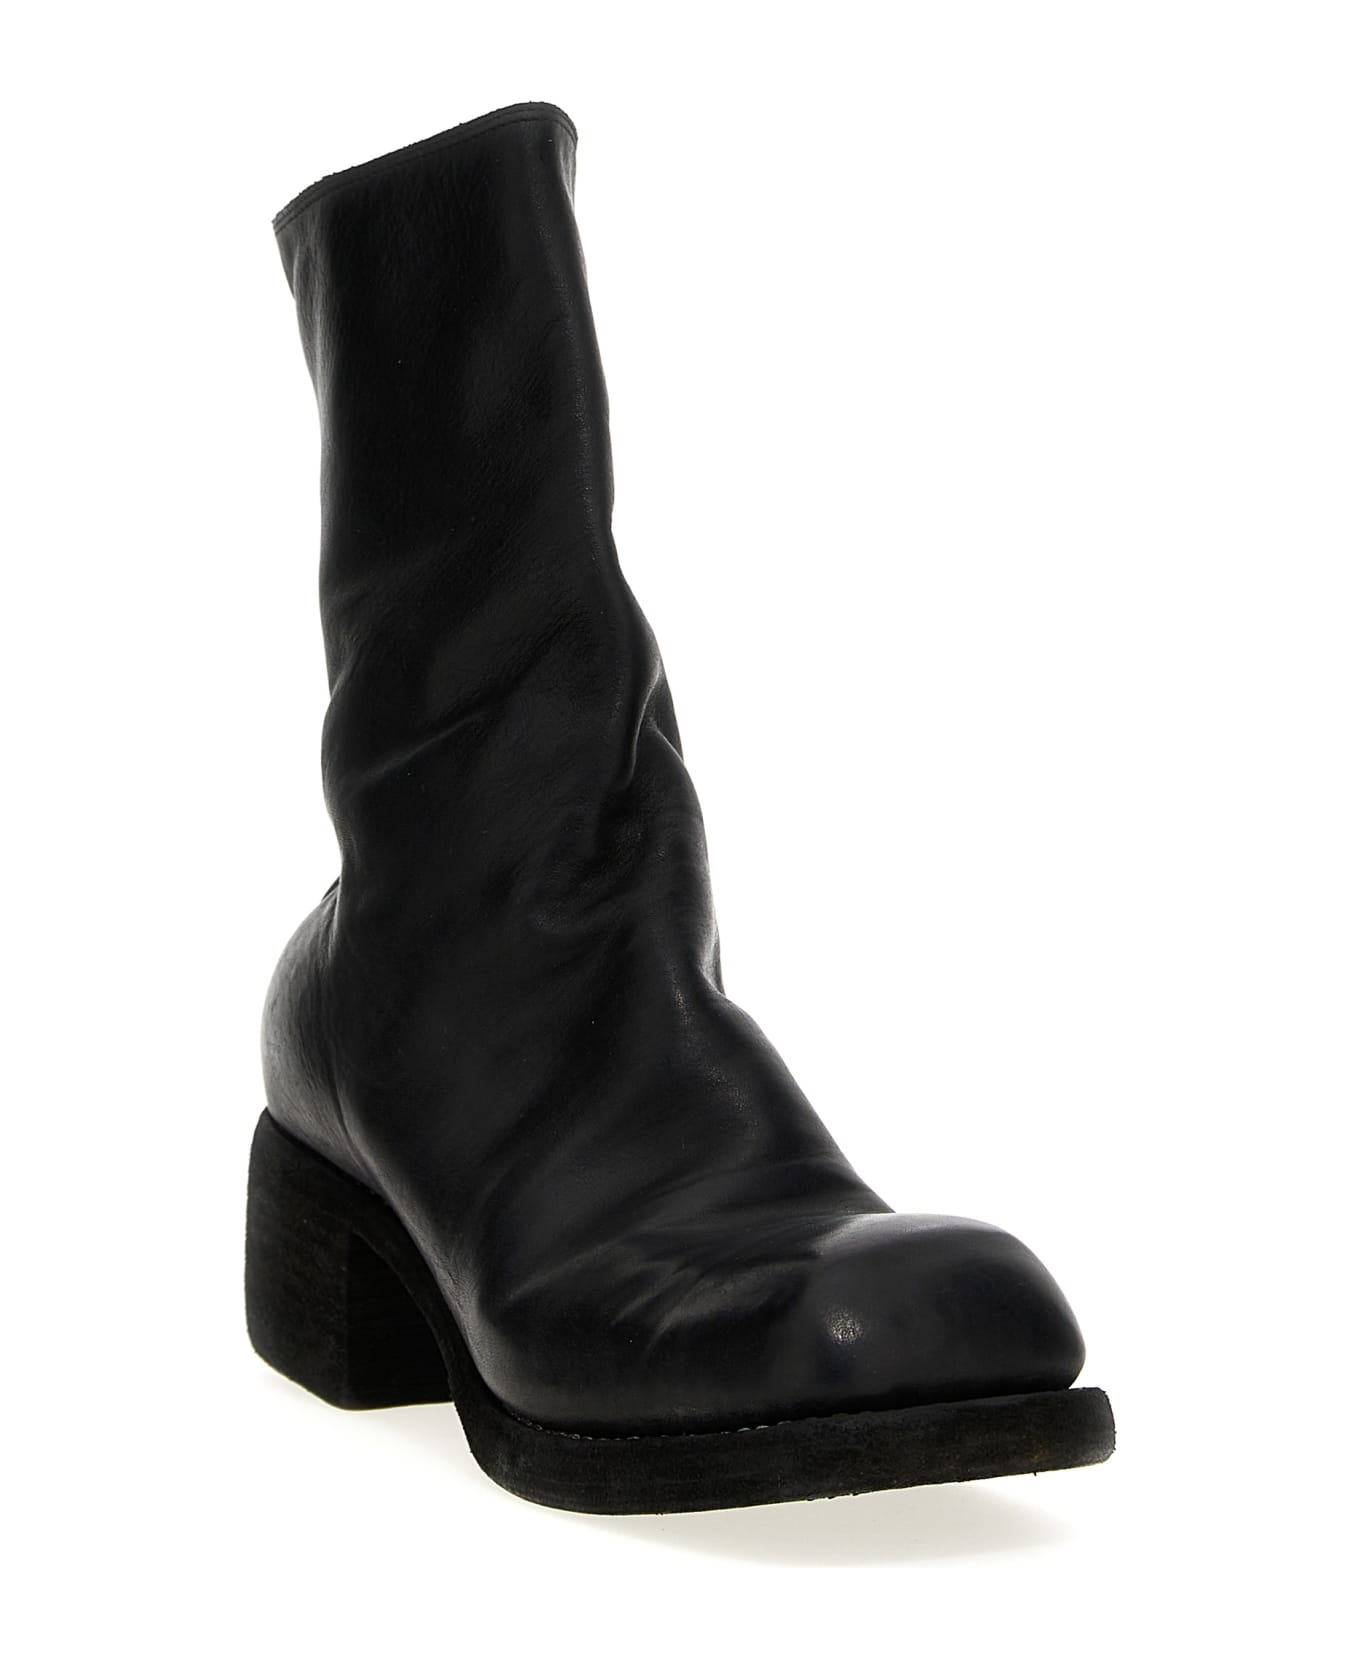 Guidi '9088' Ankle Boots - Black   ブーツ